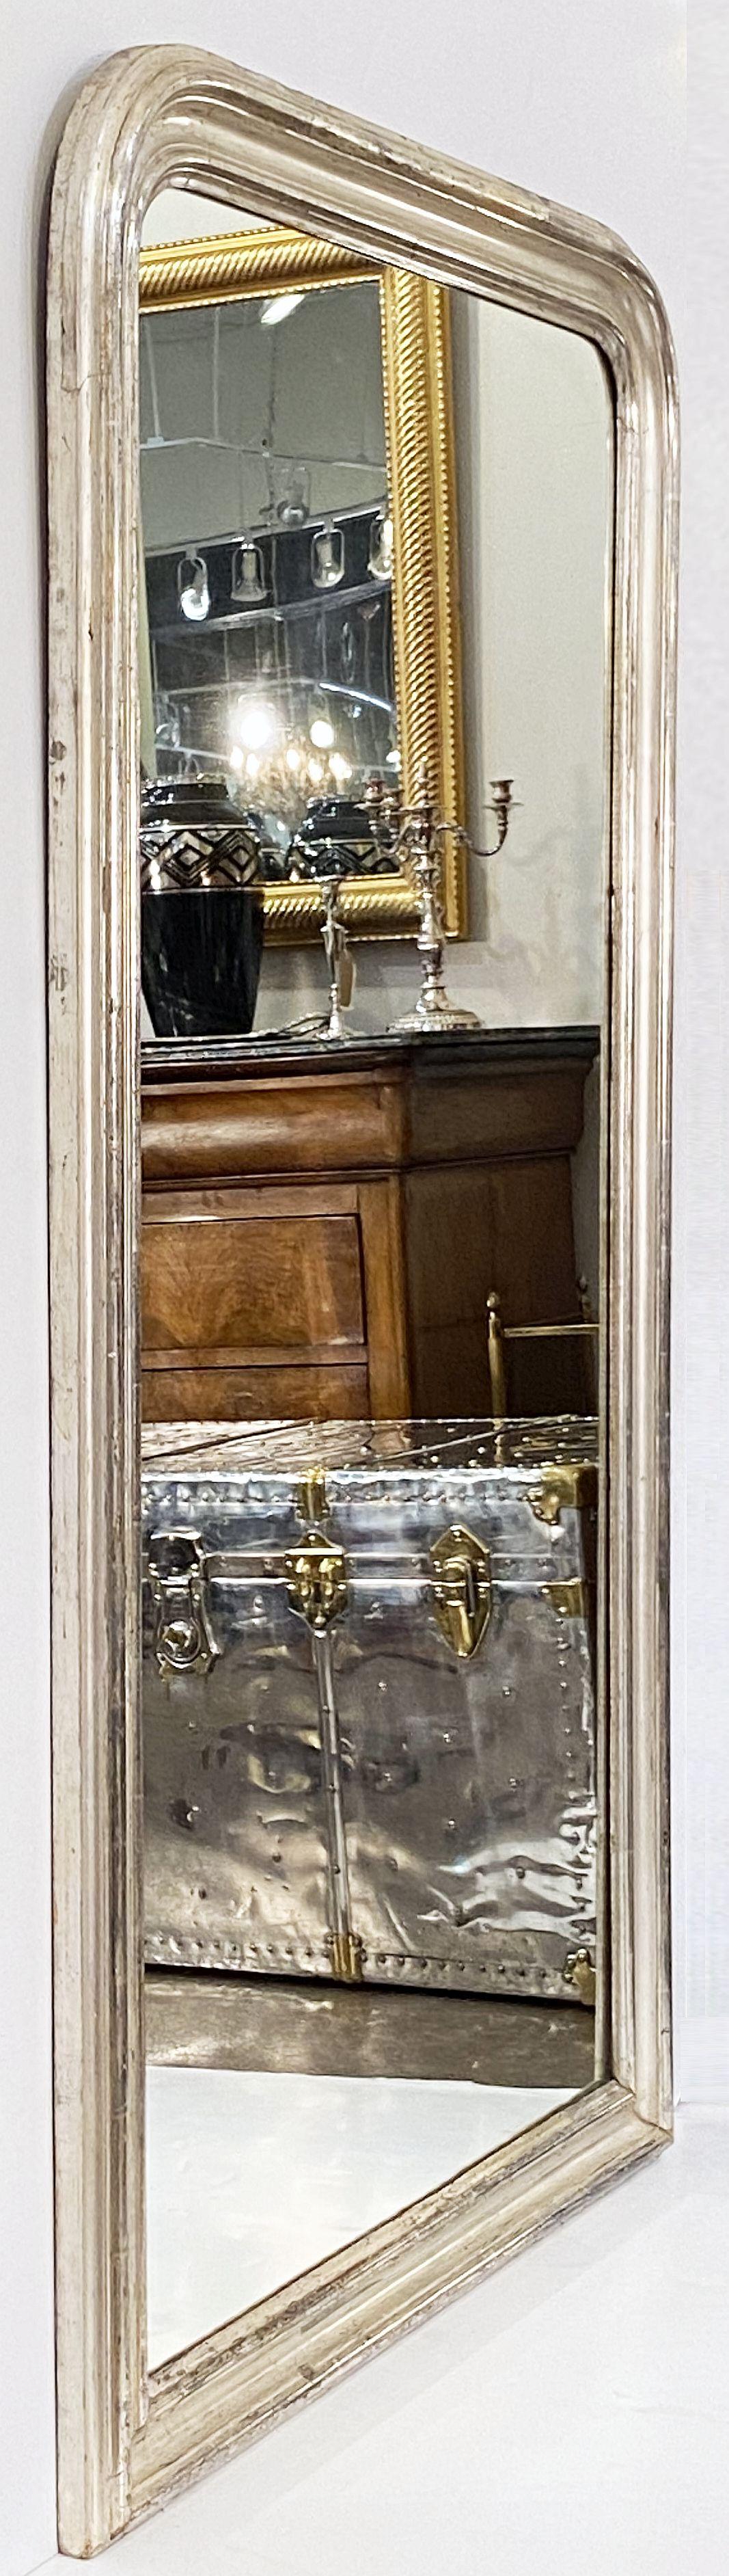 A fine tall Louis Philippe wall or dressing console mirror from France, featuring a moulded surround with a beautiful patinated silver-leaf.

Dimensions: H 62 3/4 inches x W 37 1/4 inches

Other sizes available in this style.

